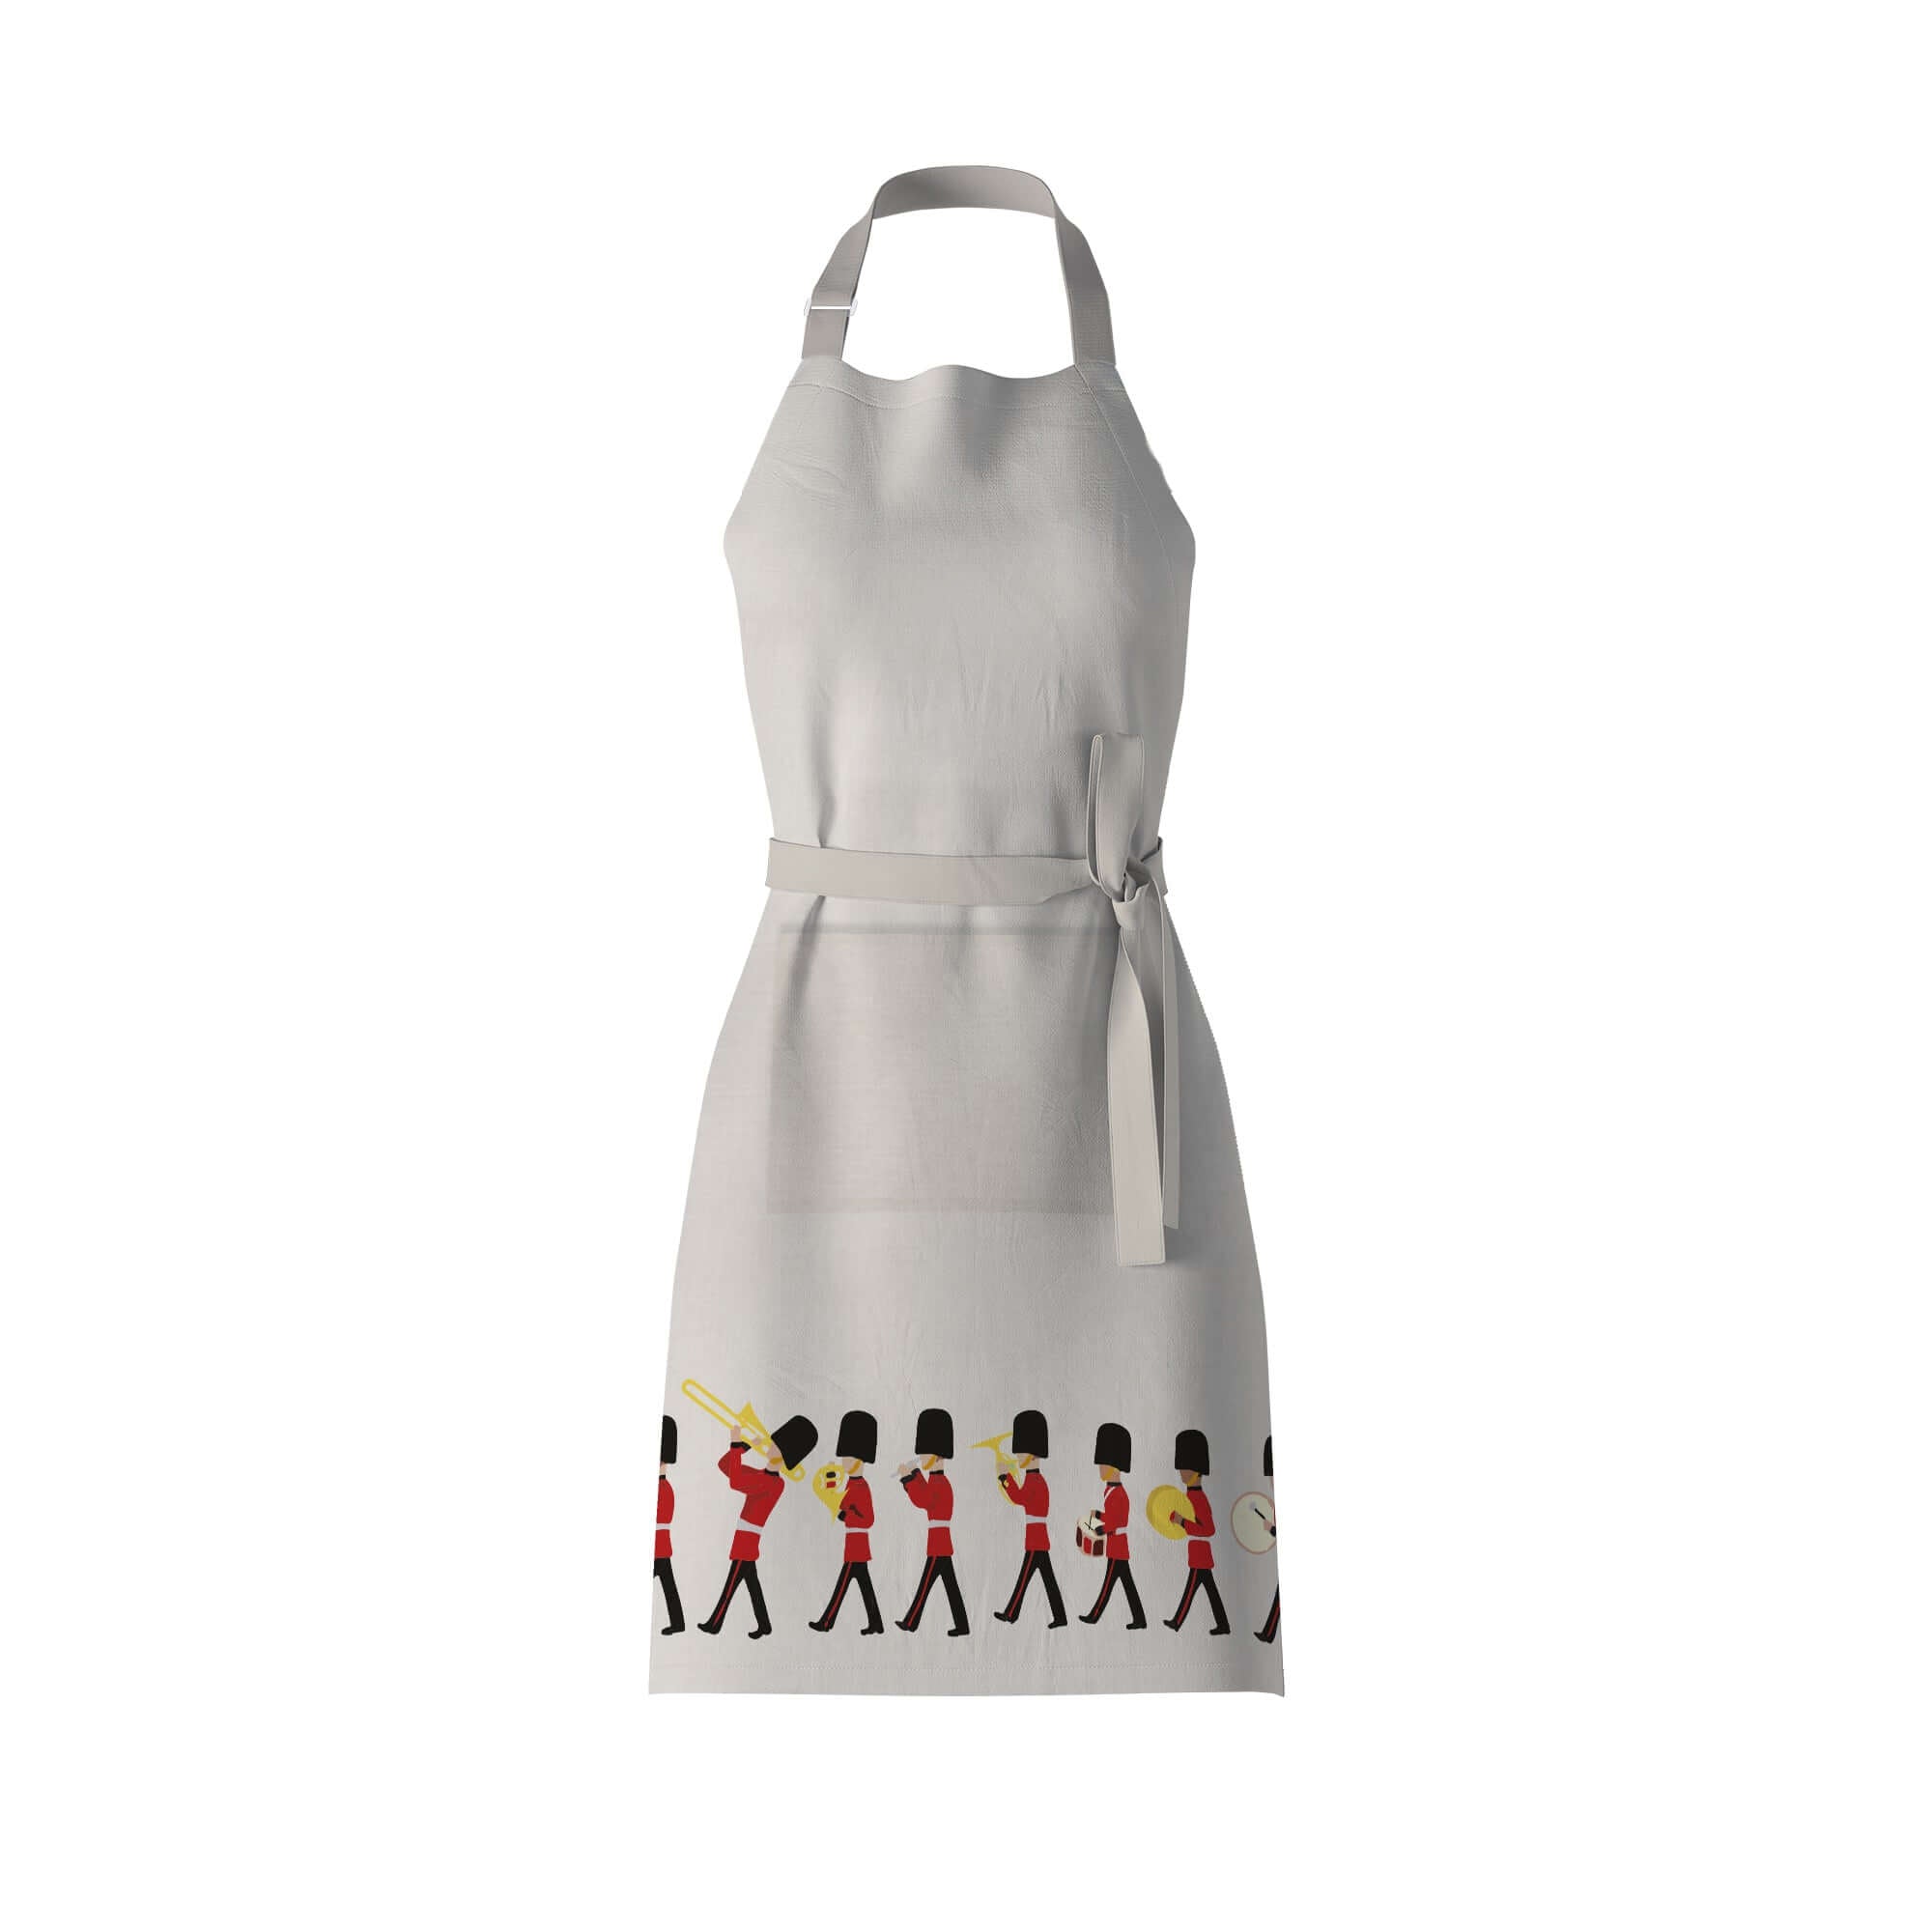 London changing of the guards marching band kitchen apron made from poly linen from mustard and gray. 